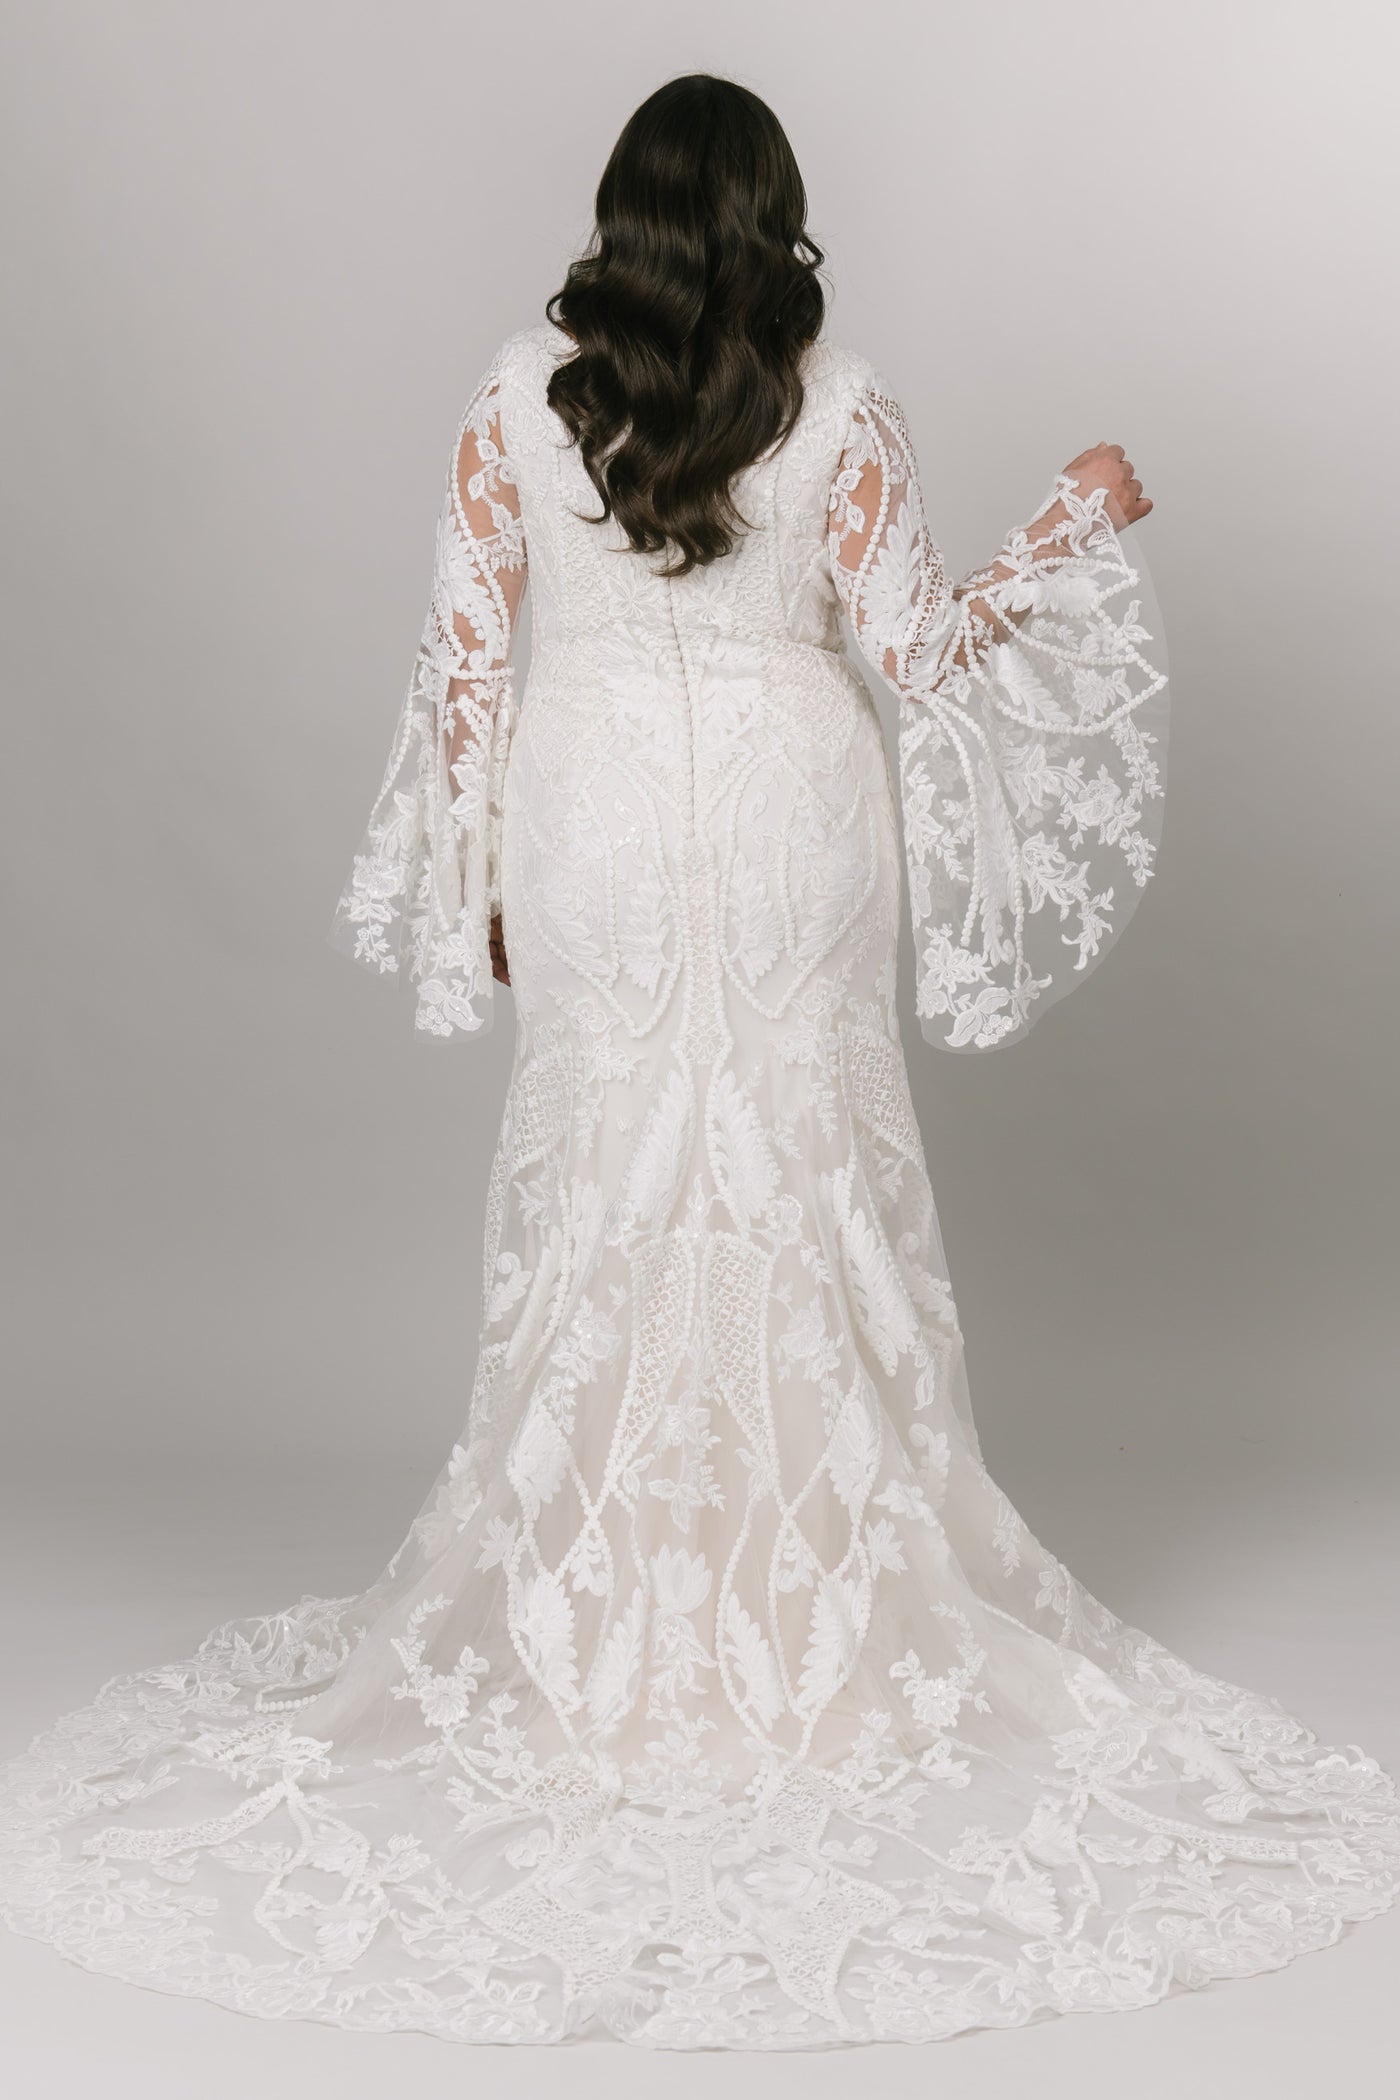 Back view of Moments Made Bridal boho styled wedding dress with long trumpet lace sleeves. It has a v-neckline and a fitted silhouette. Sheet lace covers the dress. This modest wedding dress is perfect for any wedding season.